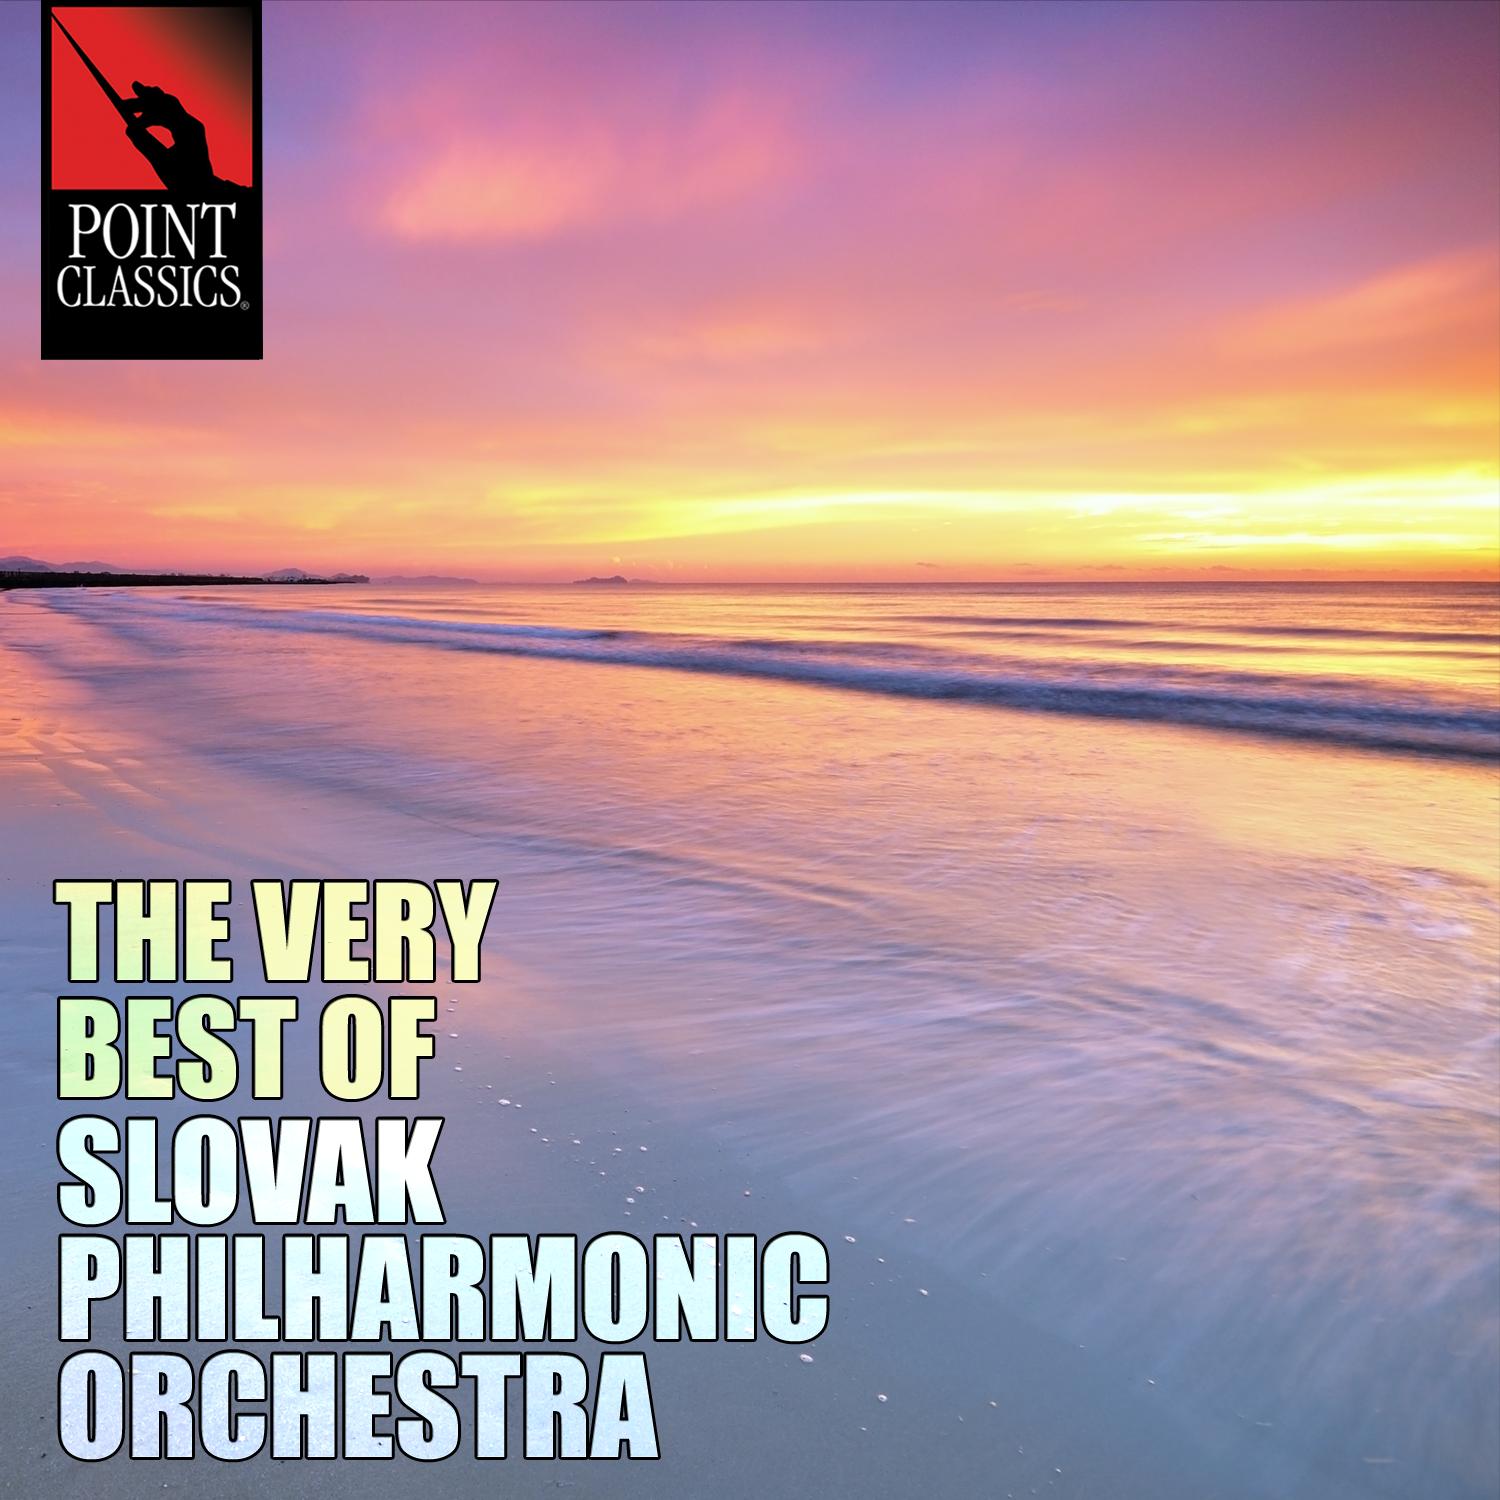 The Very Best of Slovak Philharmonic Orchestra - 50 Tracks